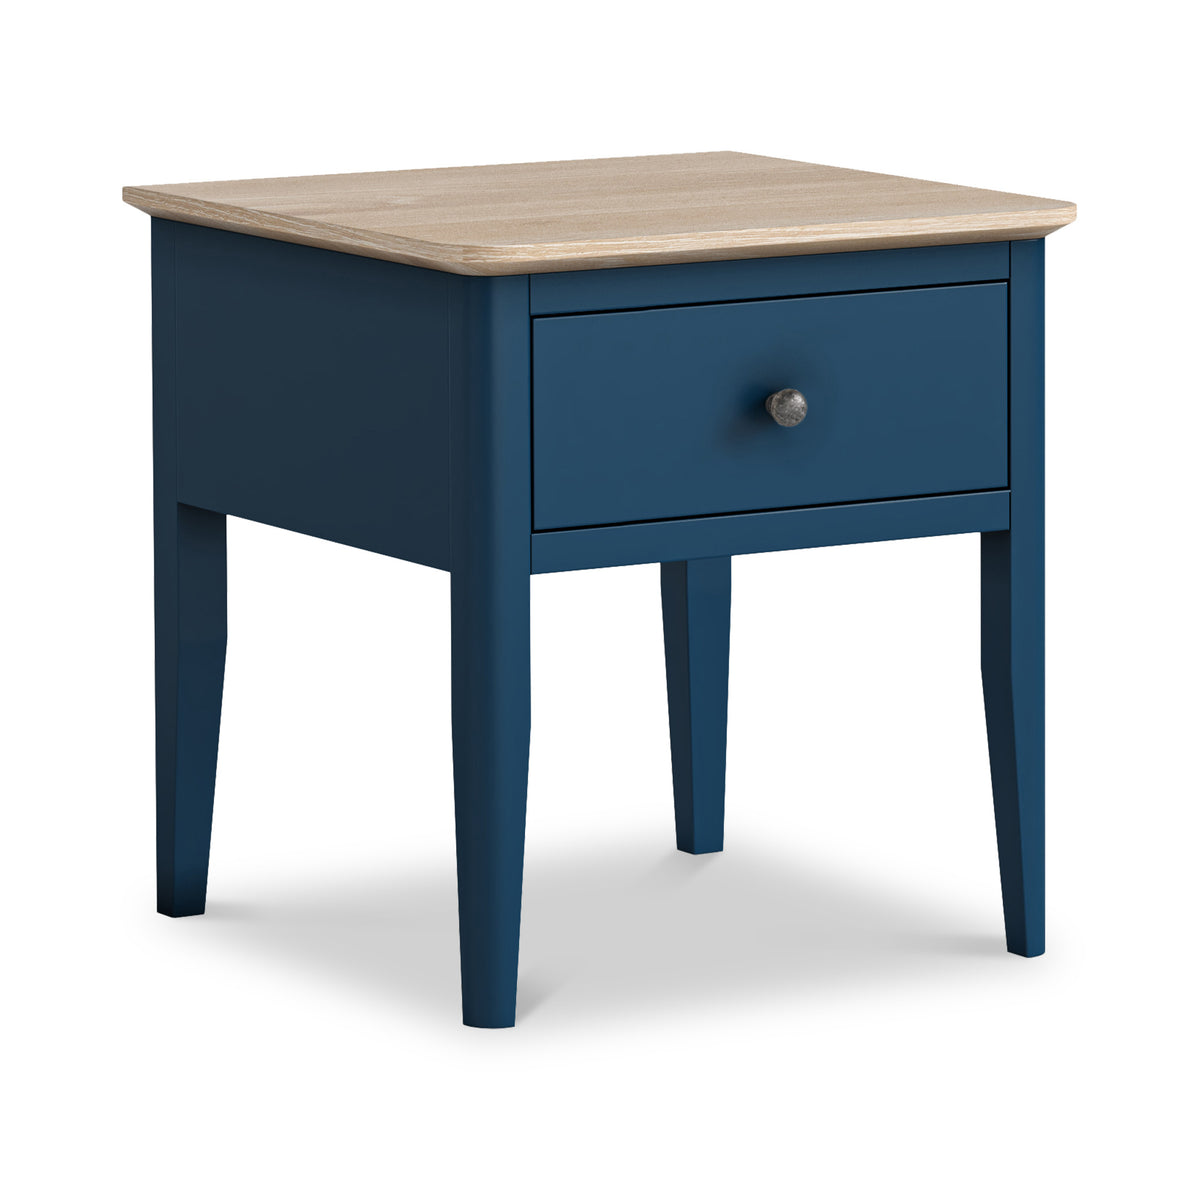 Penrose Navy Blue Lamp Table with metal handle from Roseland Furniture